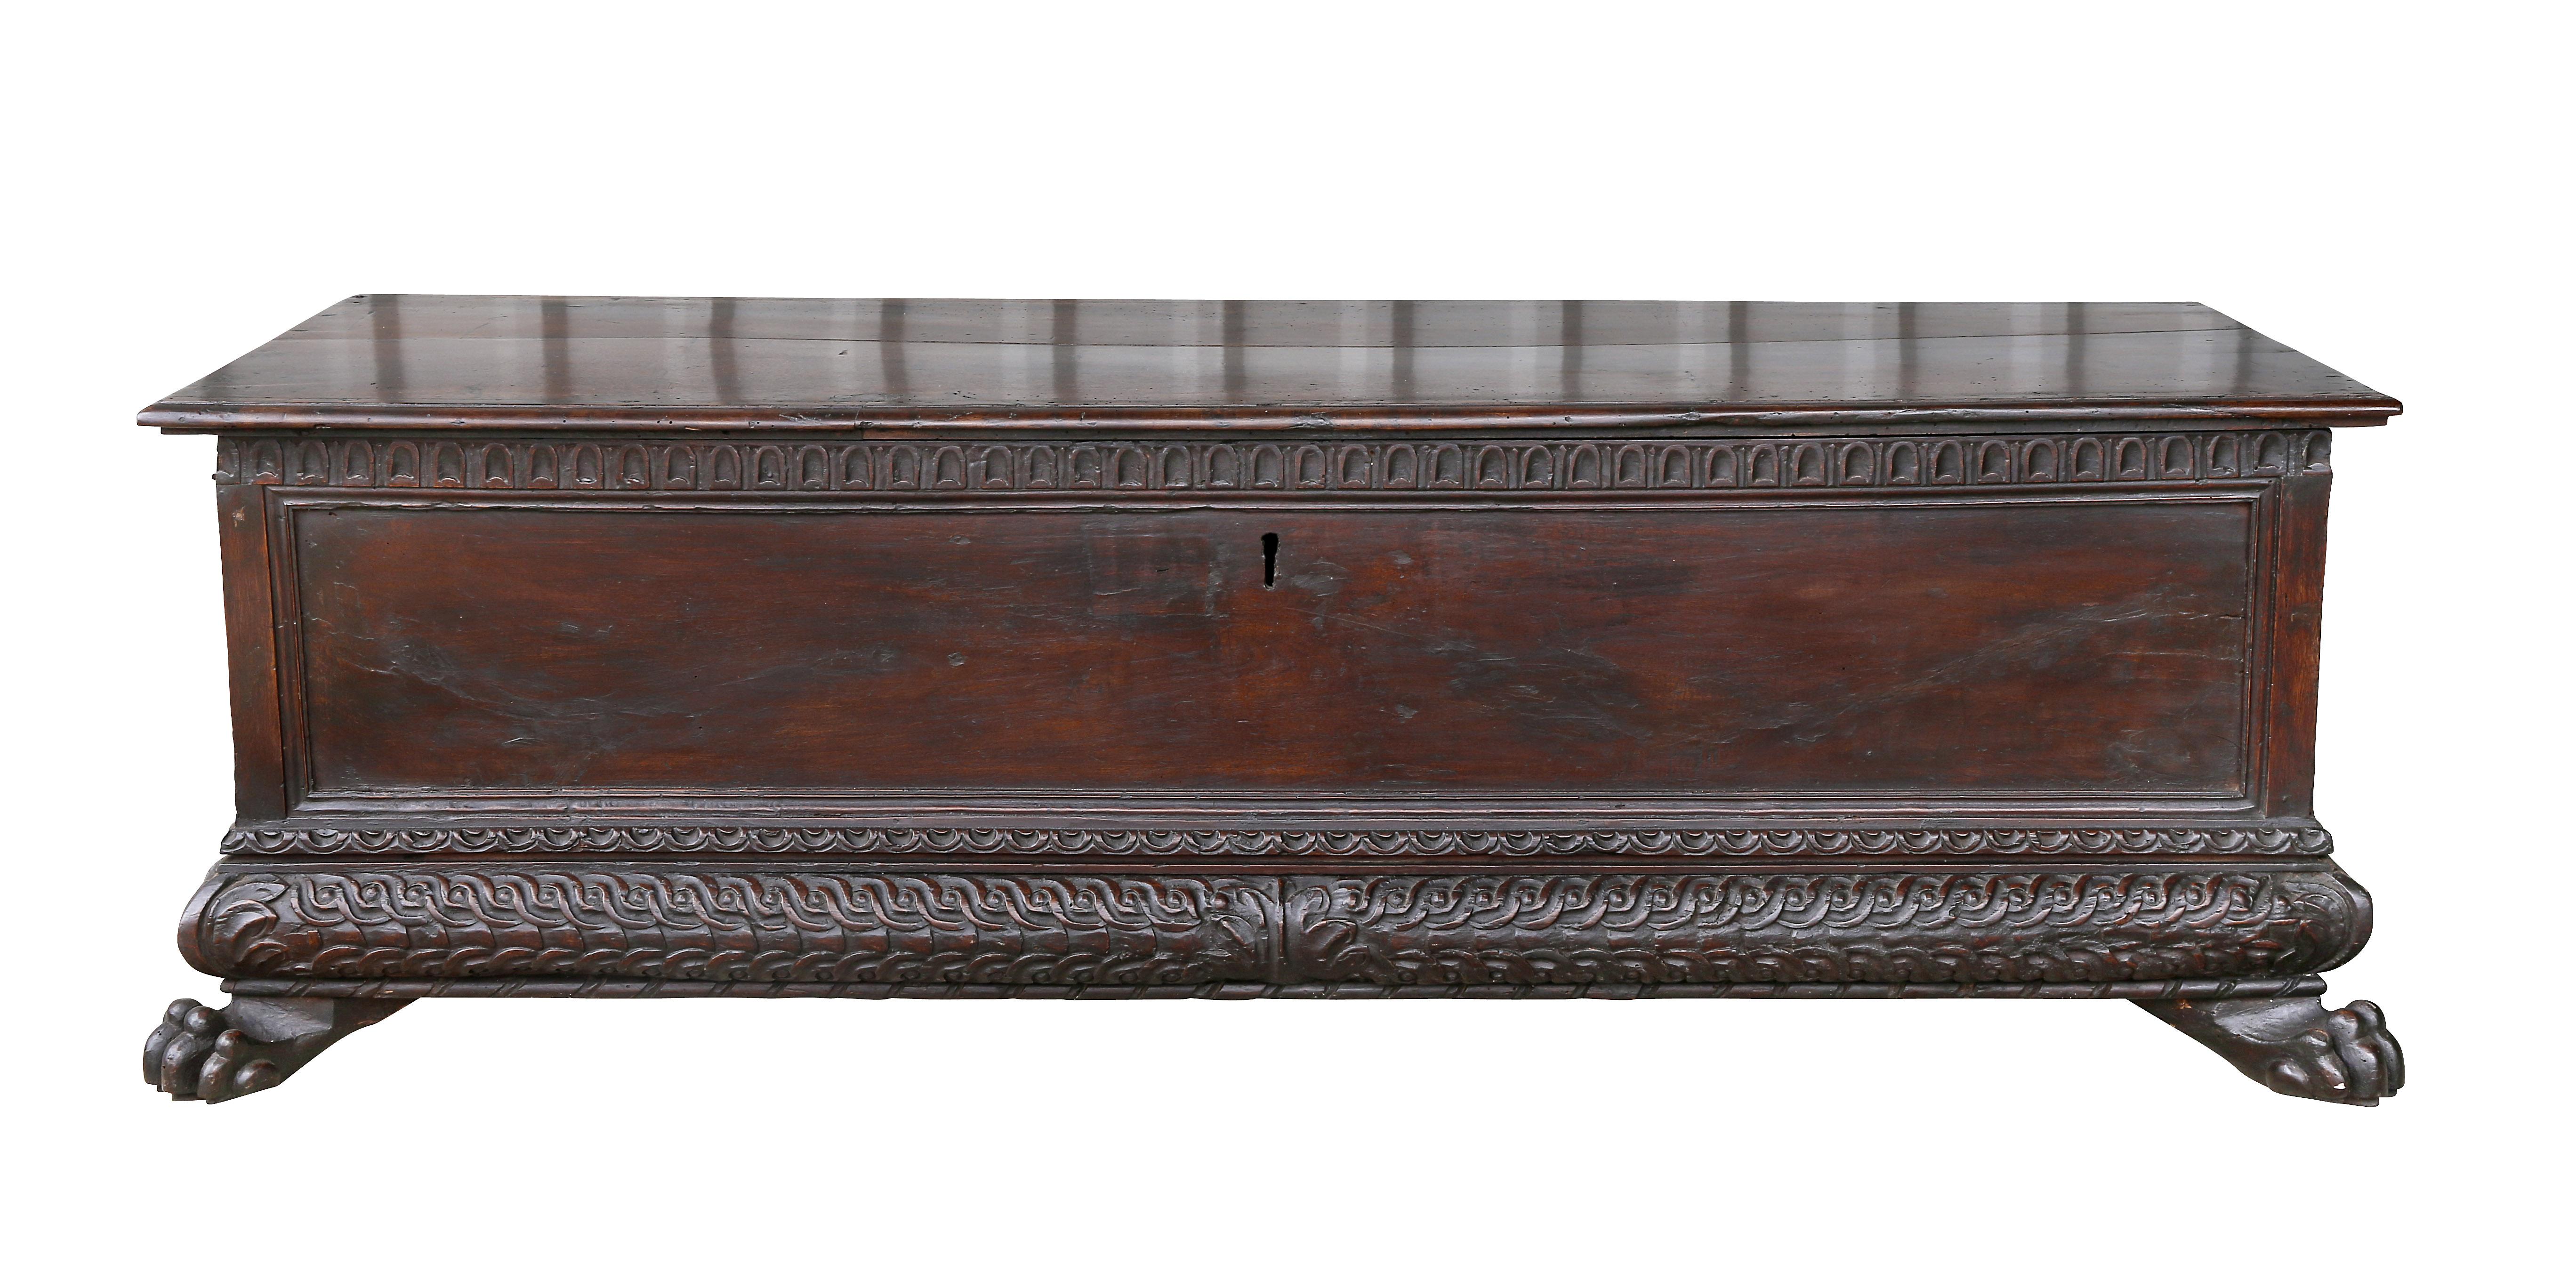 Rectangular hinged top opening to compartment over a conforming case with carved arched fluted carving, the base with guilloche carving and acanthus leaf carved corners, lions paw feet.